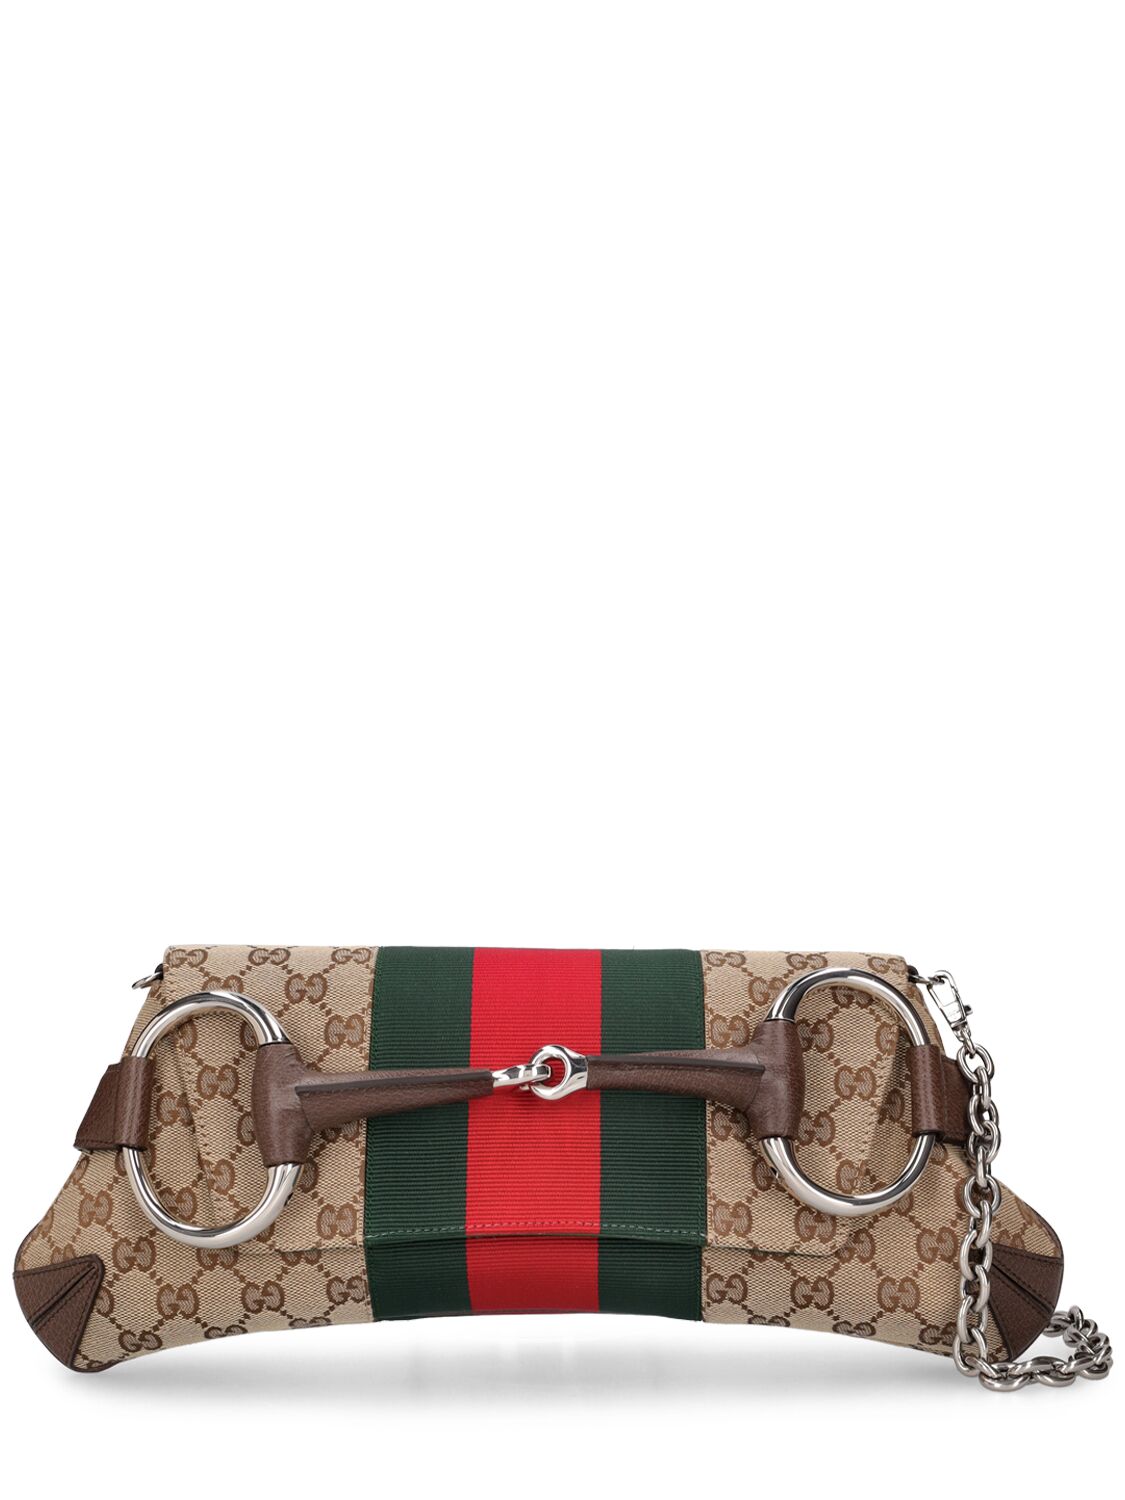 Gucci Horsebit Chain small shoulder bag in beige and ebony GG canvas